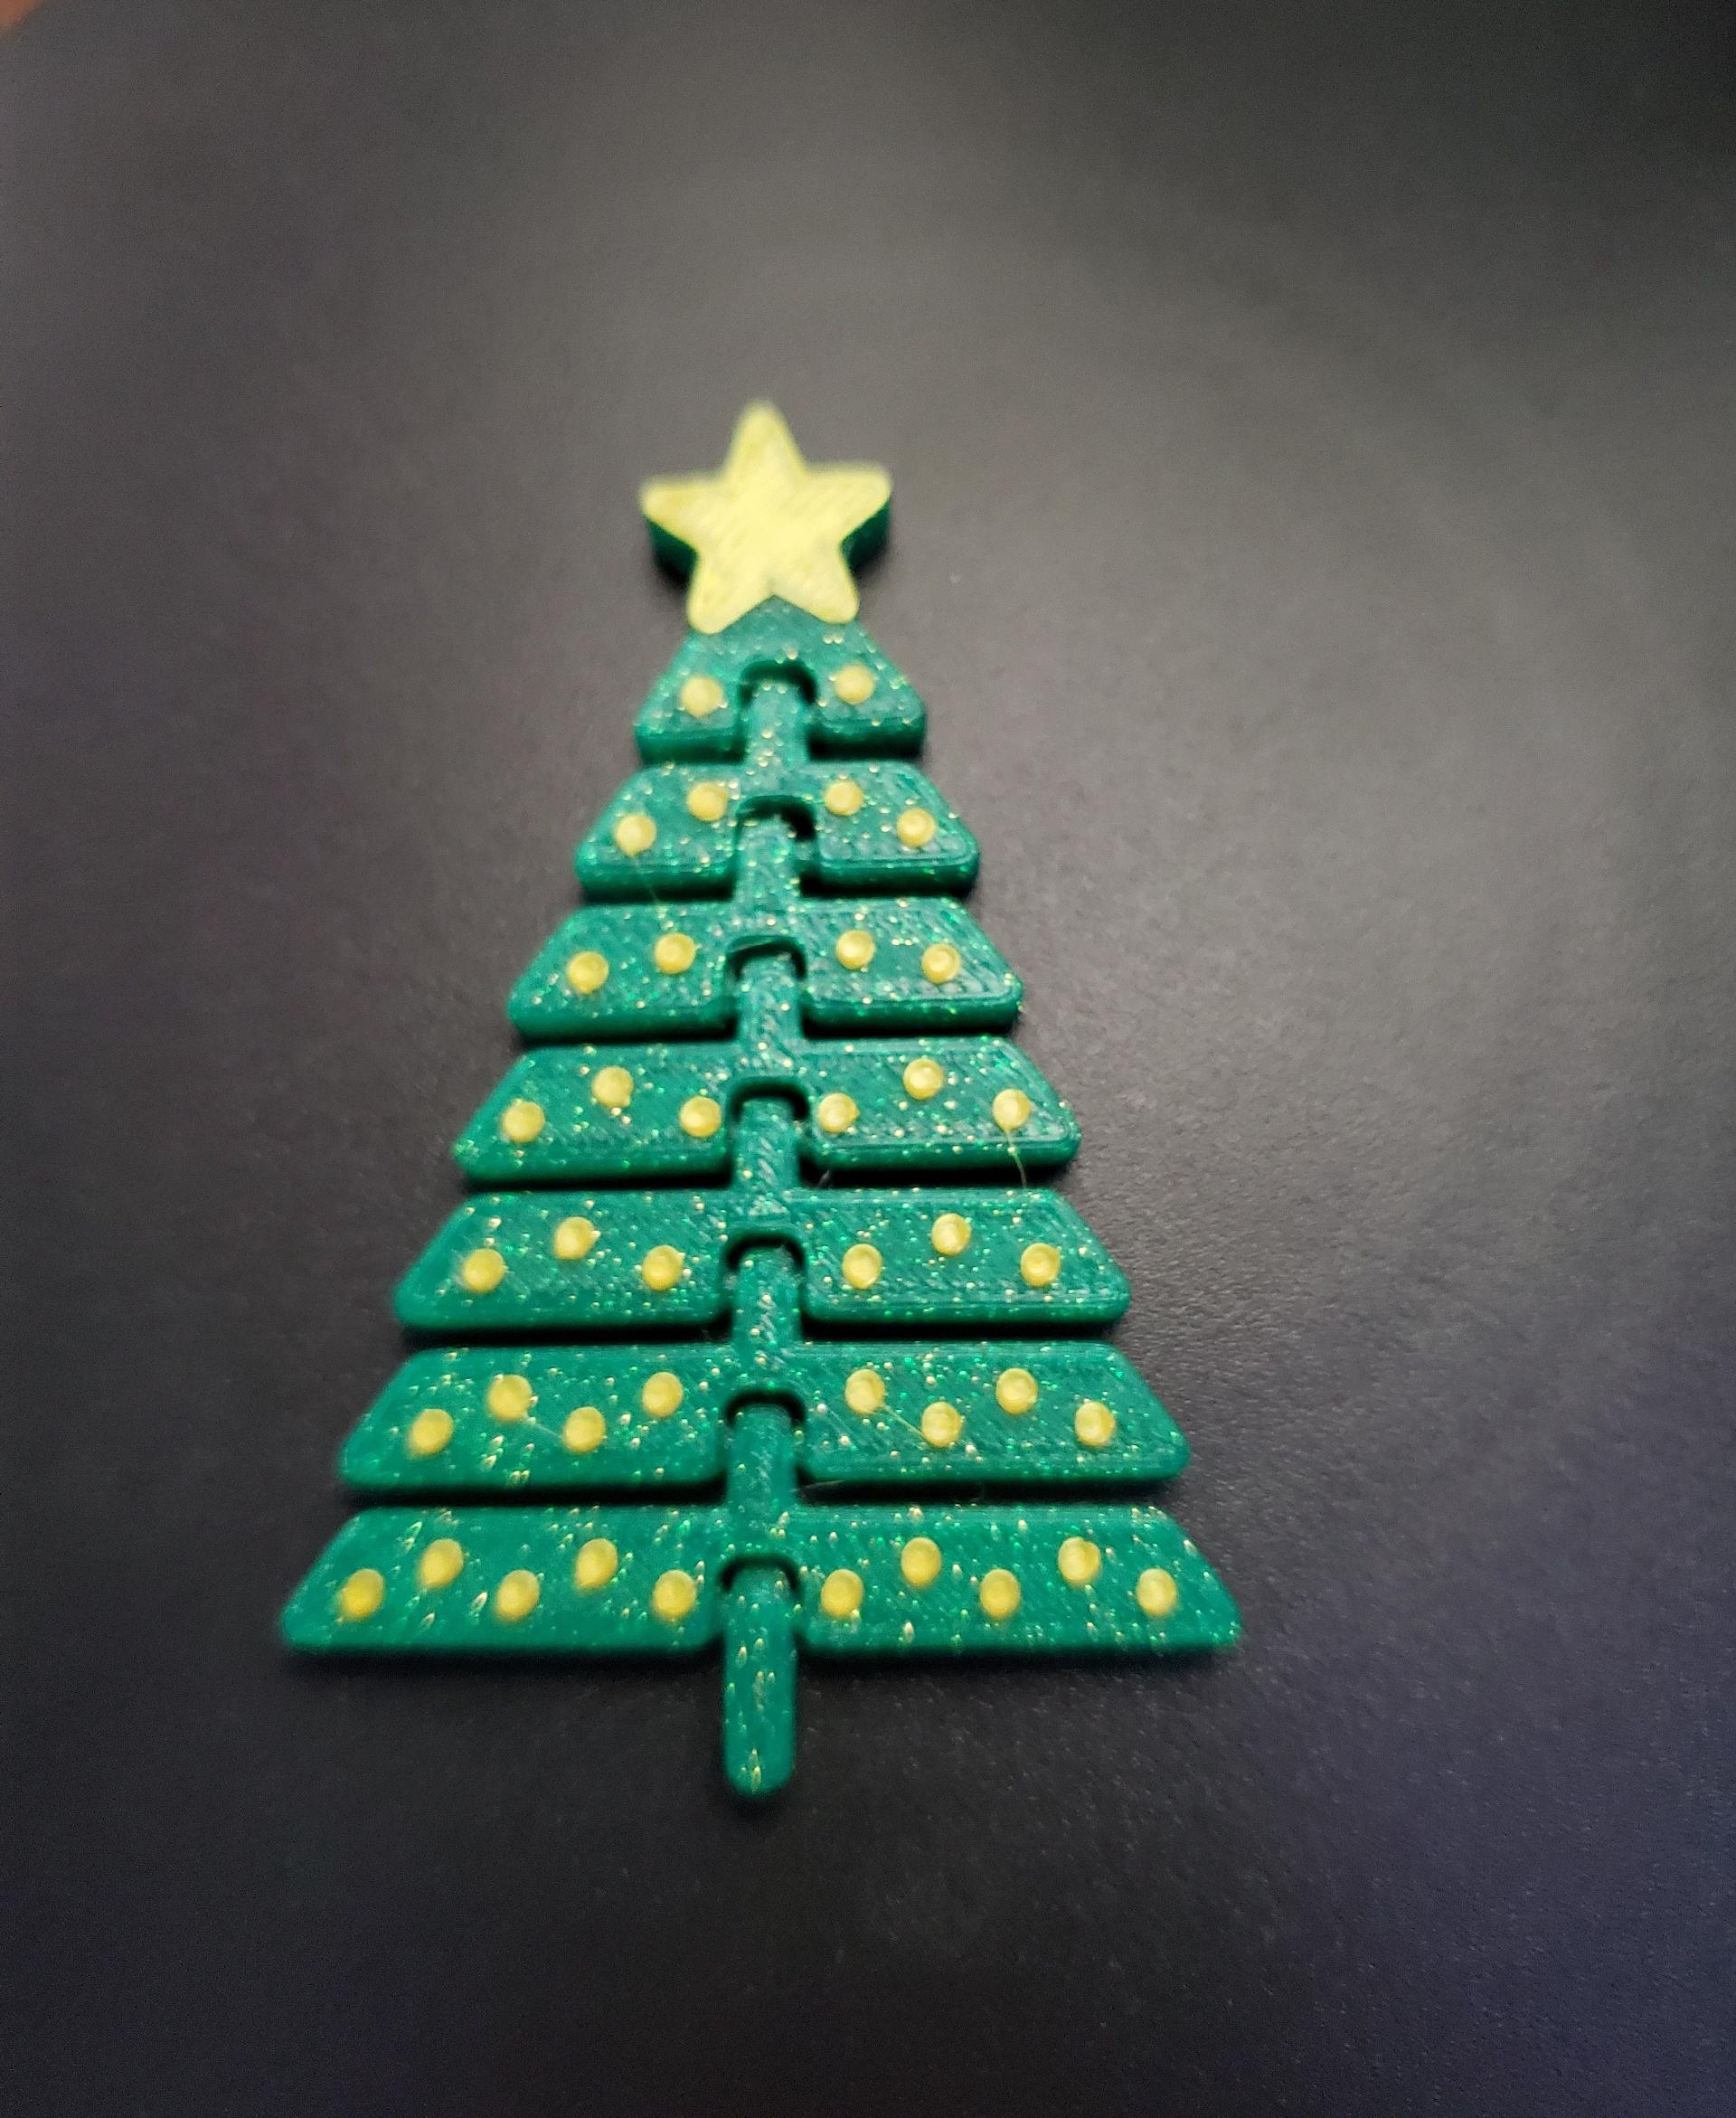 Articulated Christmas Tree with Star and Ornaments - Print in place fidget toys - 3mf - protopasta forest fantasy green - 3d model